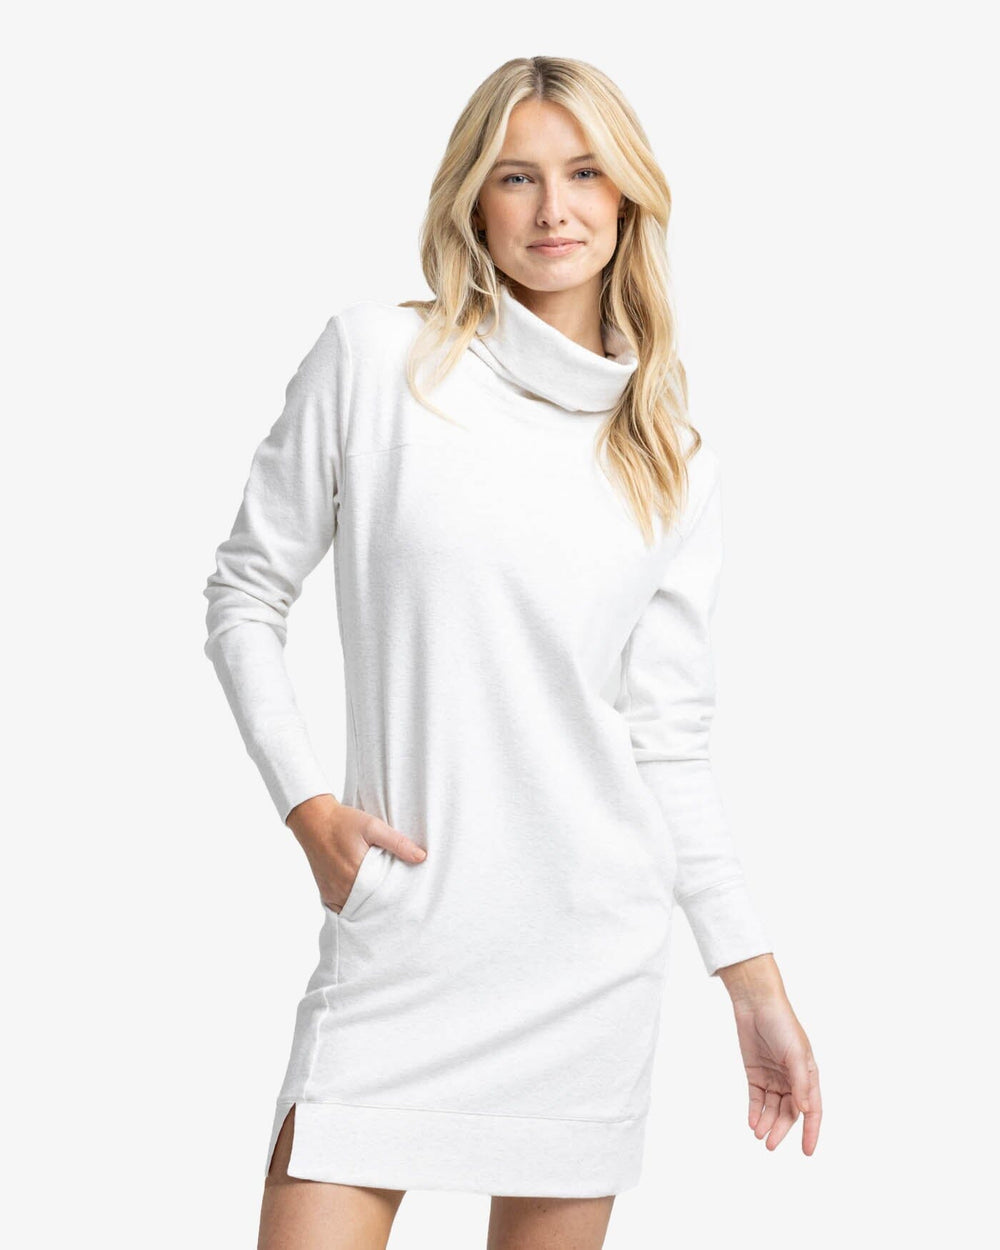 The front view of the Southern Tide Lynn Dress by Southern Tide - Heather Star White